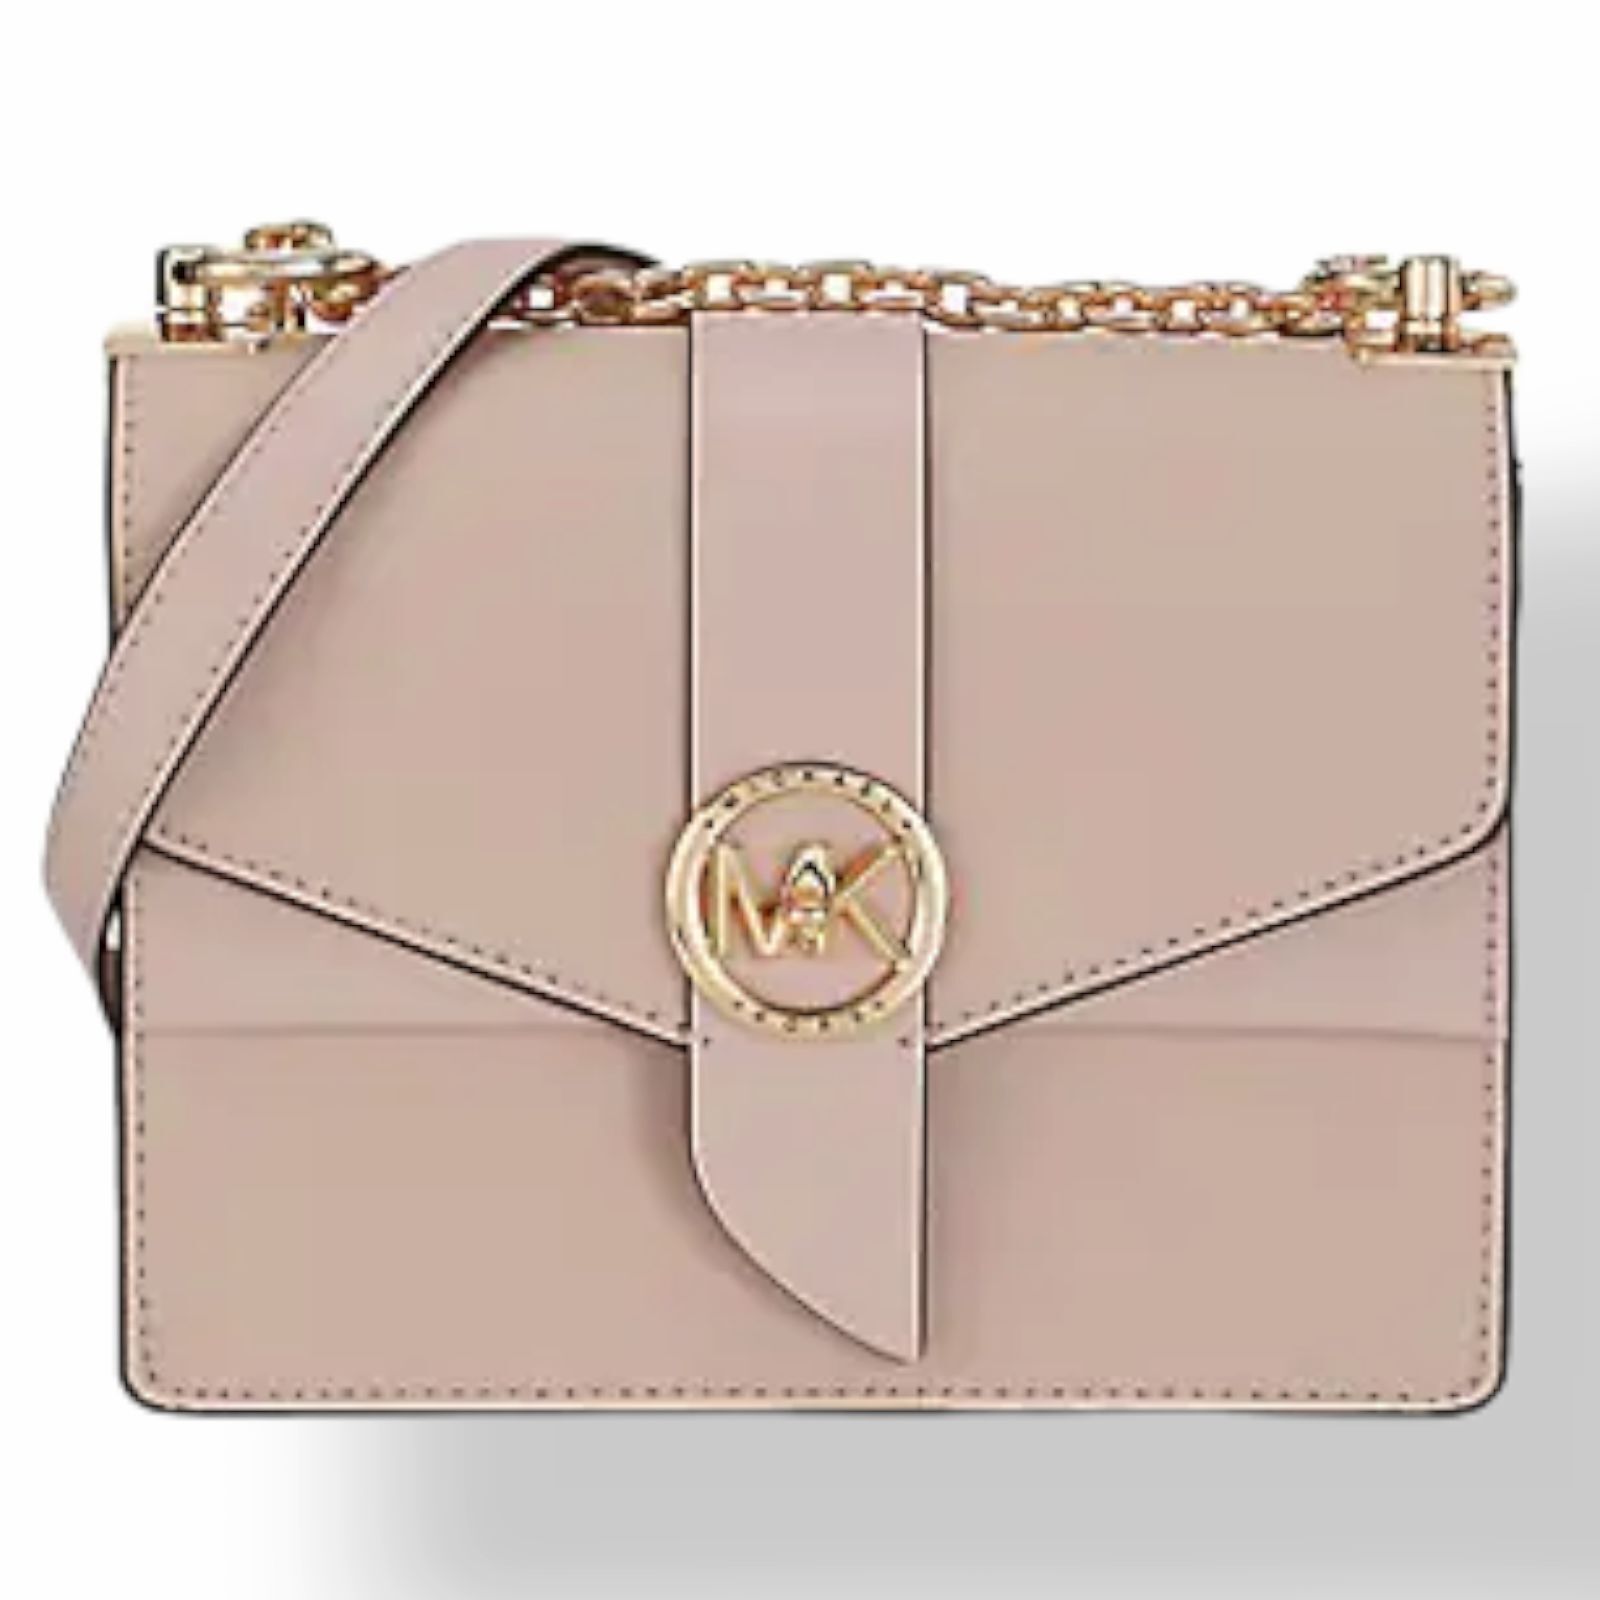 MICHAEL KORS ~Greenwich Small Leather Convertible South Pacific